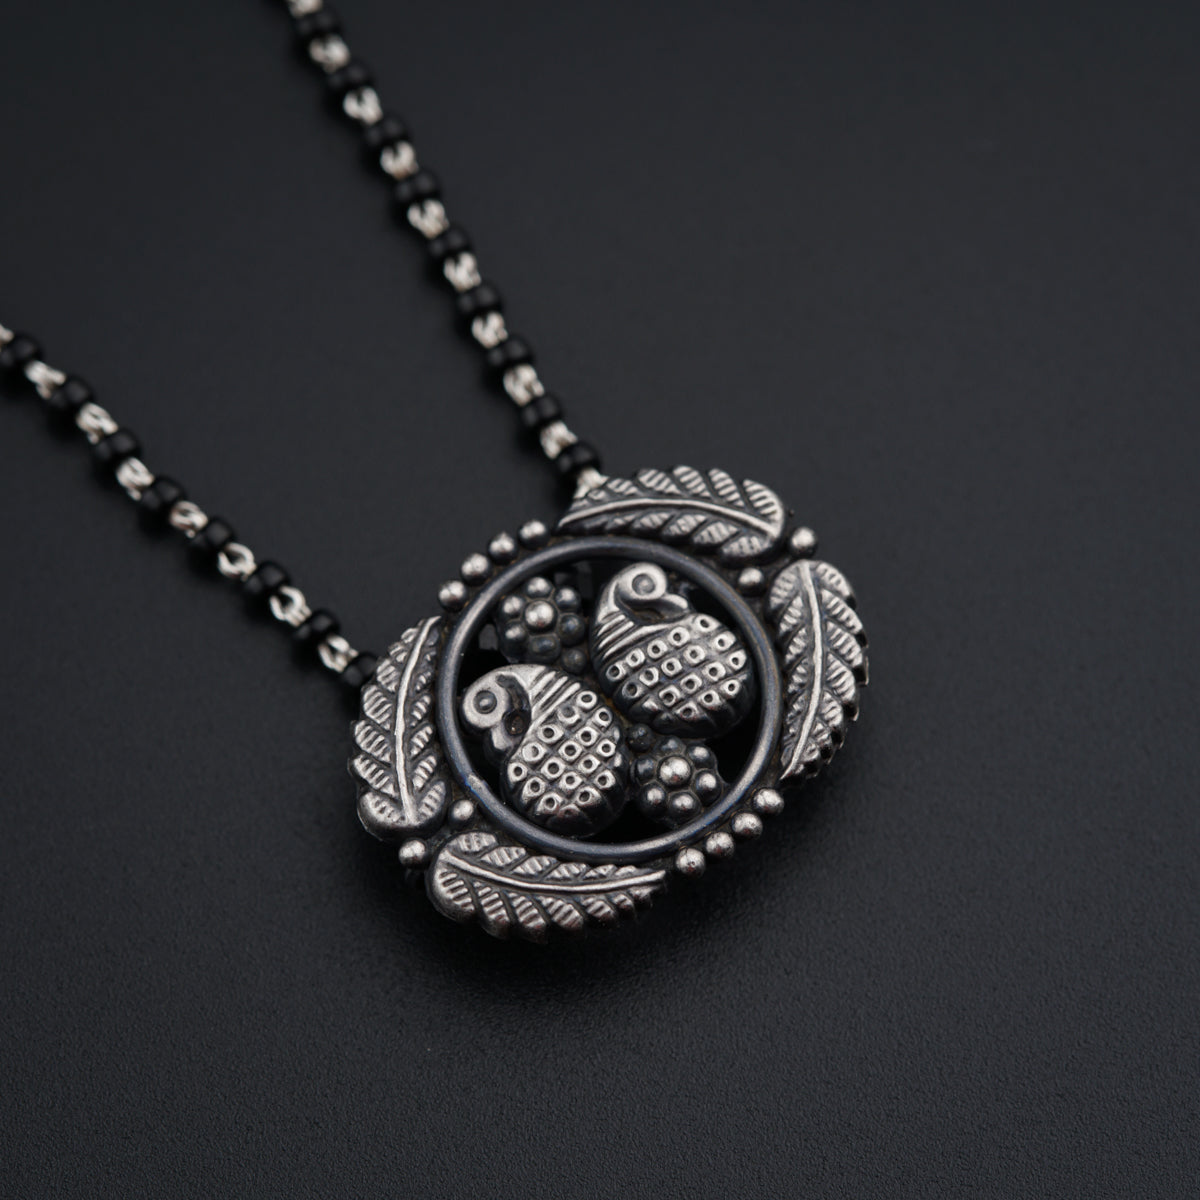 a black necklace with two owls on it